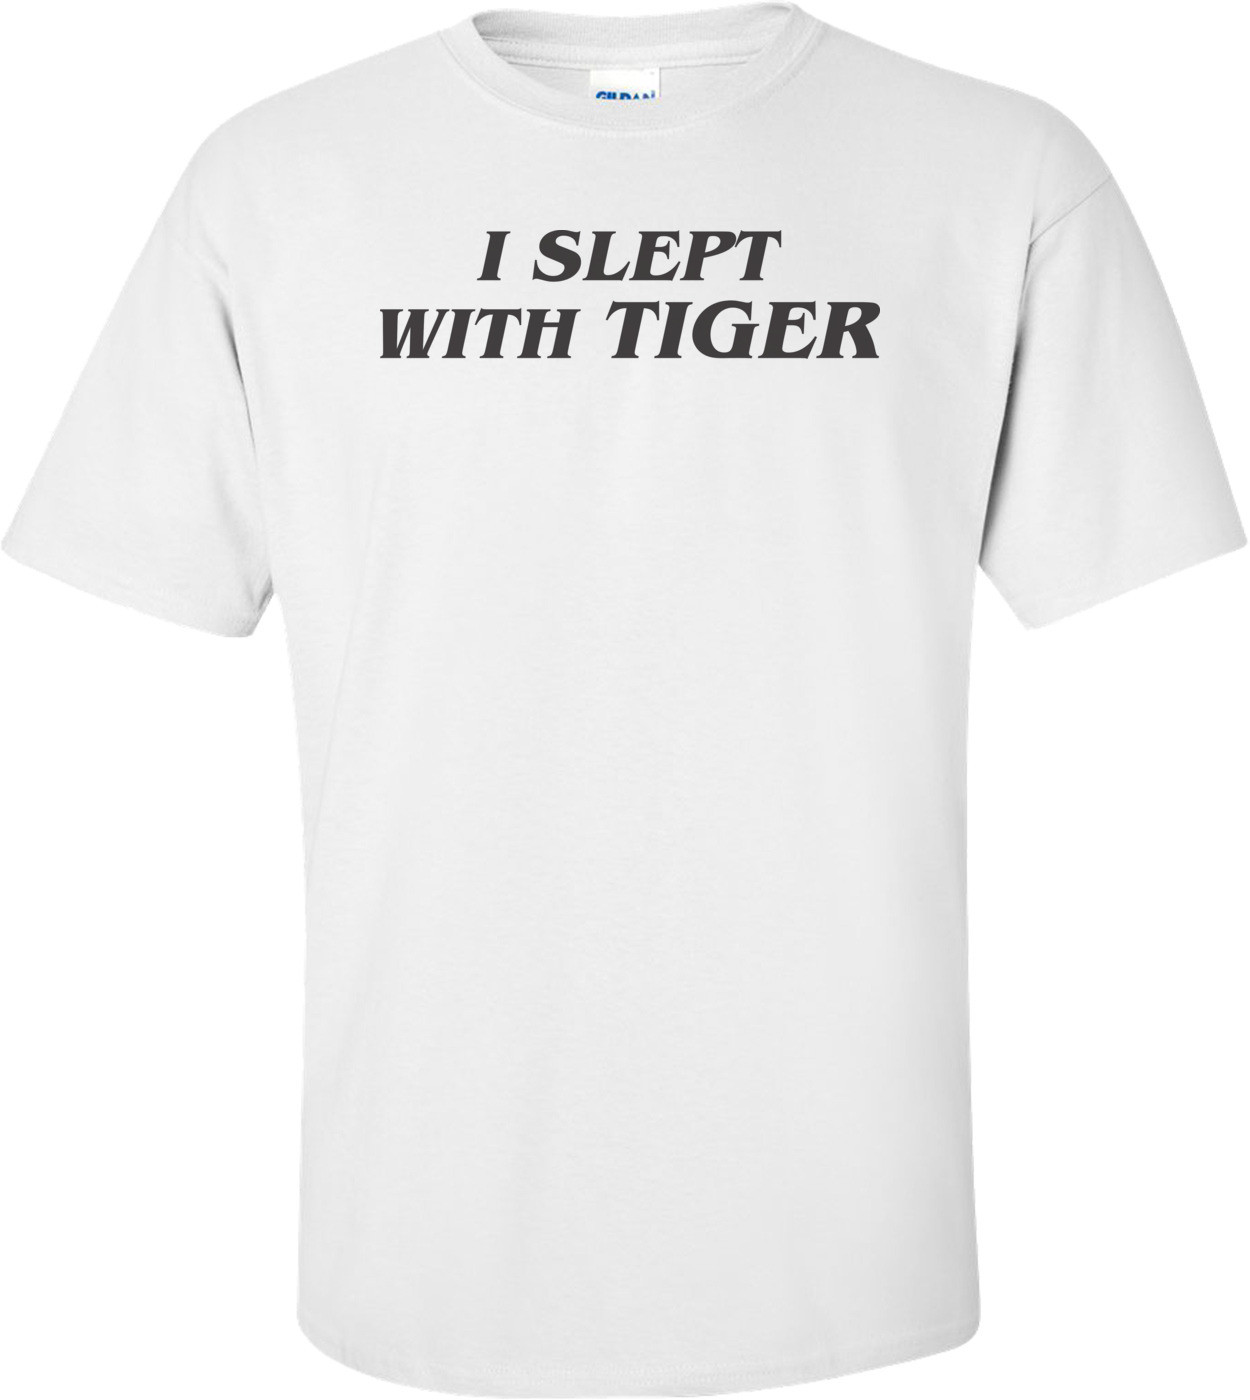 I Slept With Tiger